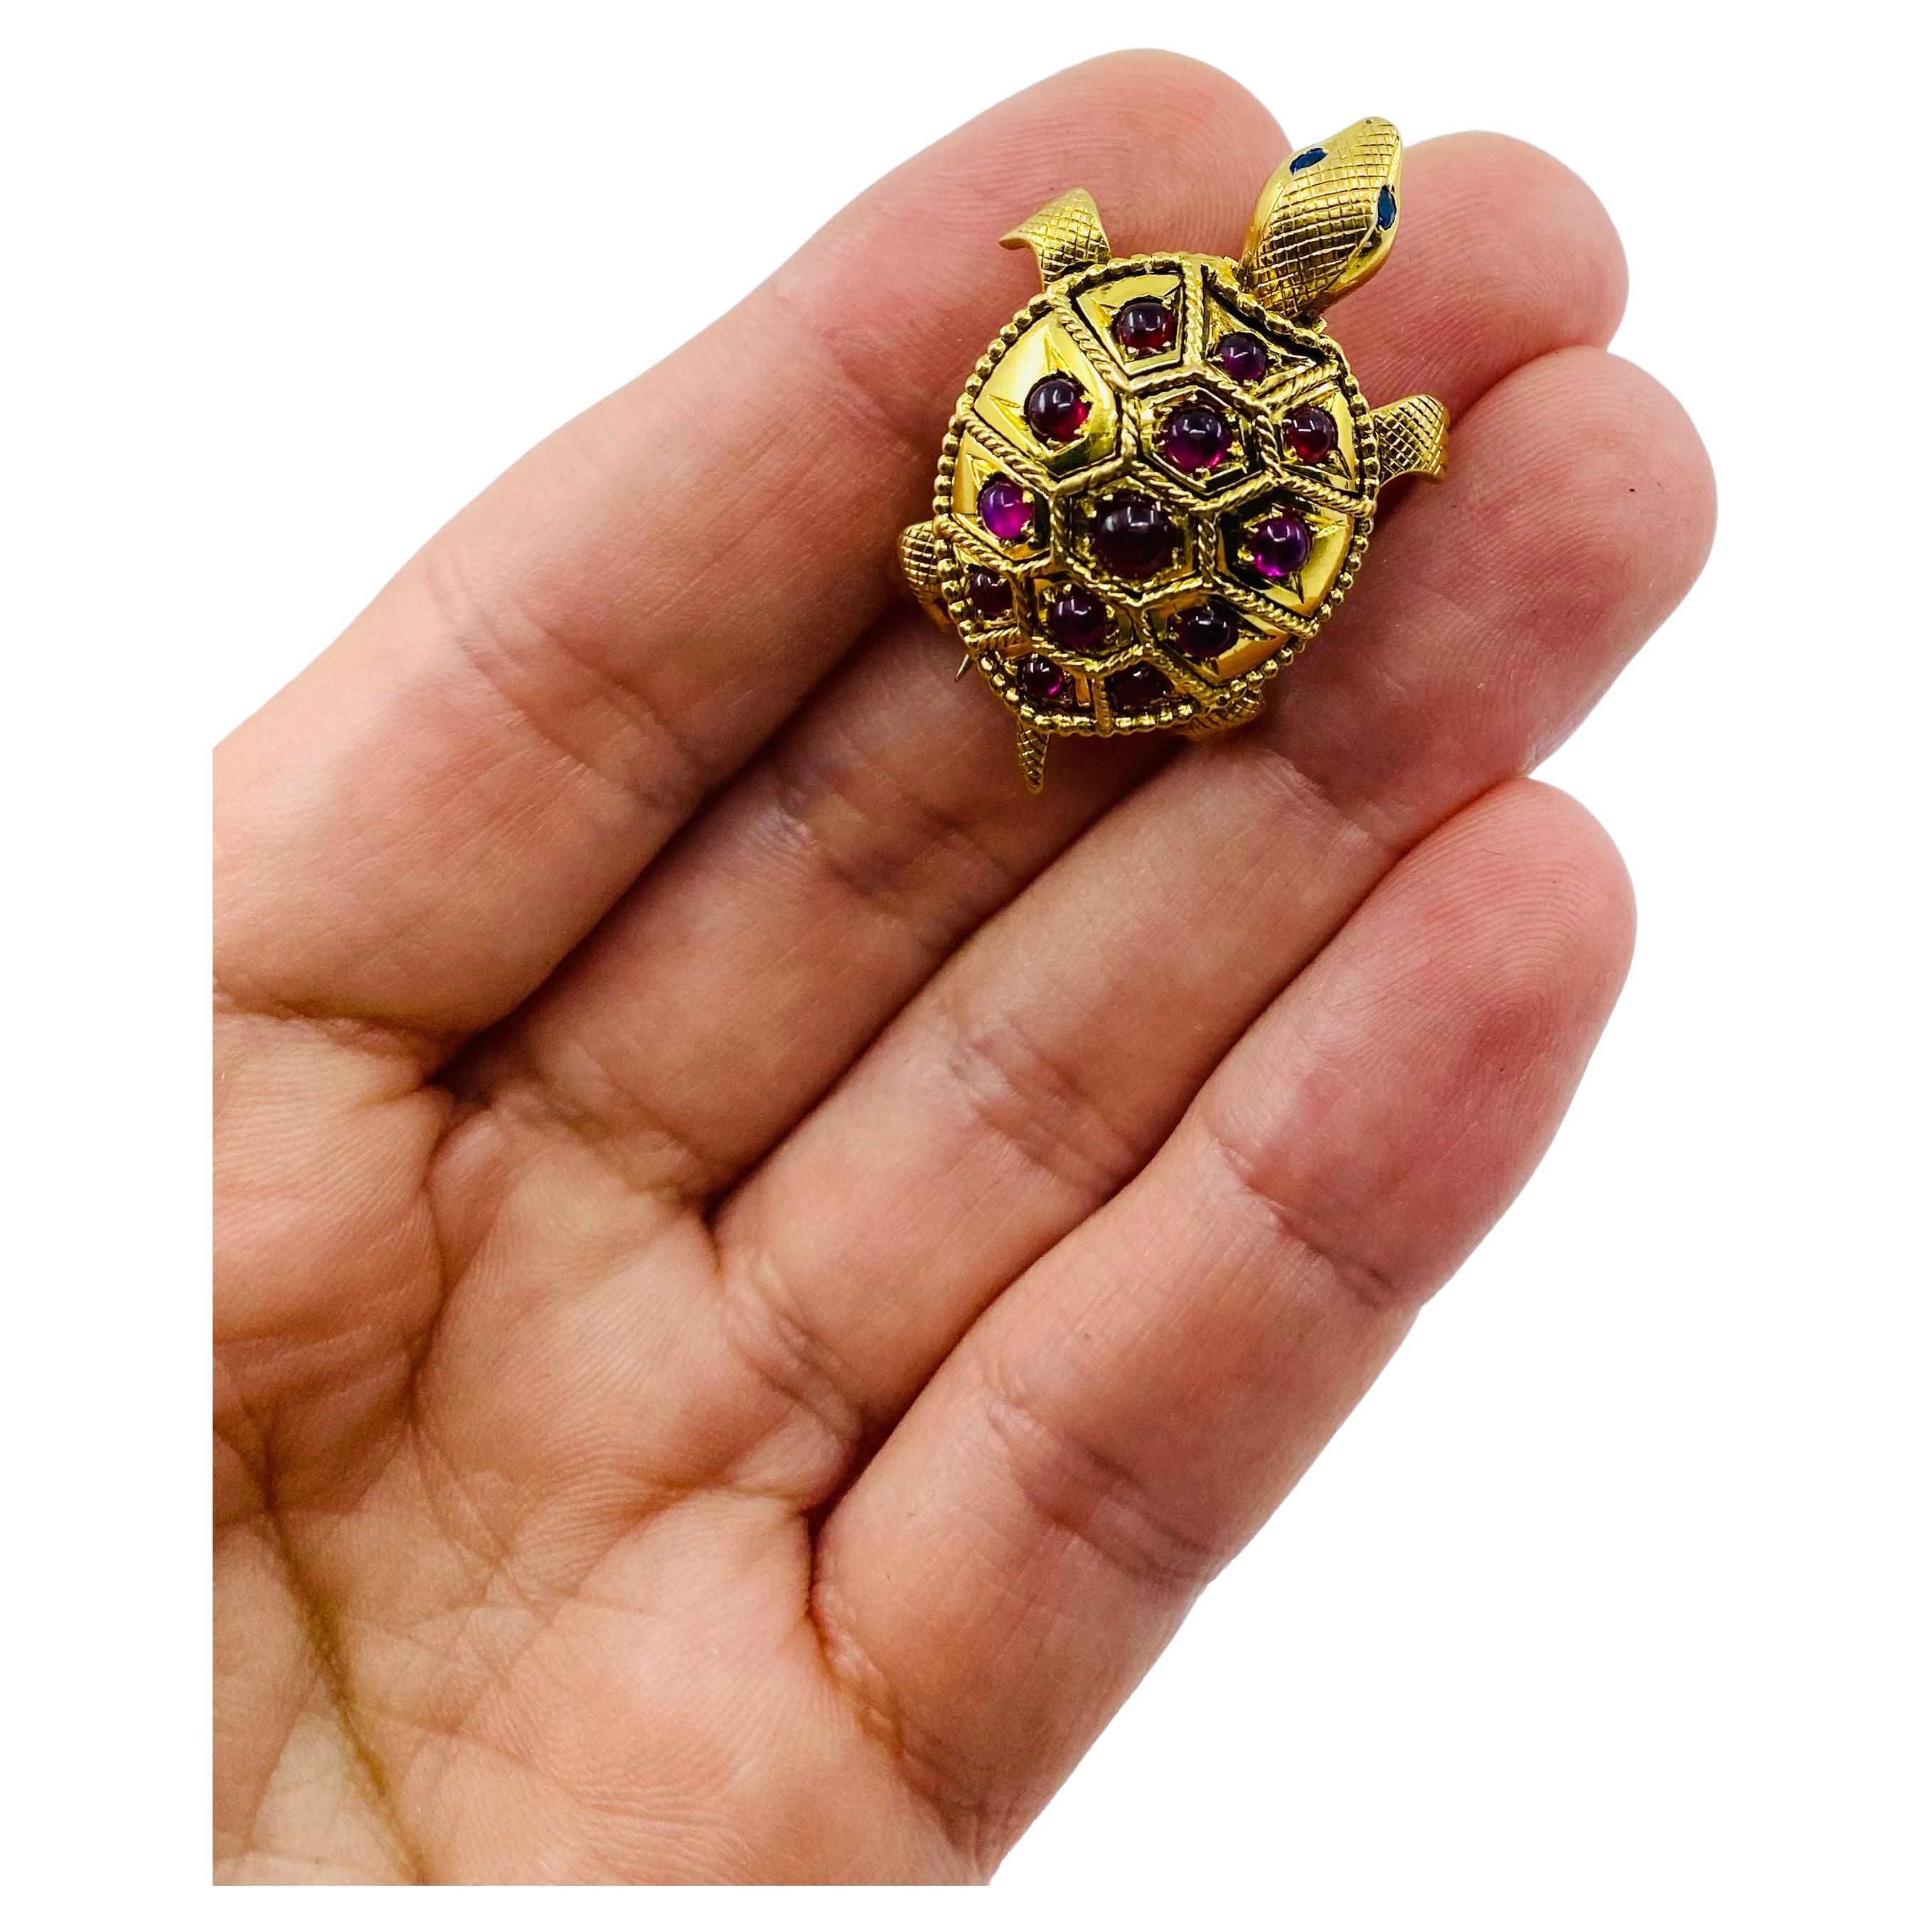 A cute French vintage turtle brooch made of 18k gold, features ruby. This amazing pin was meticulously made by skillfully applying multiple goldsmith techniques. The turtle’s shell is made of polished gold, with the sections divided by the rope gold